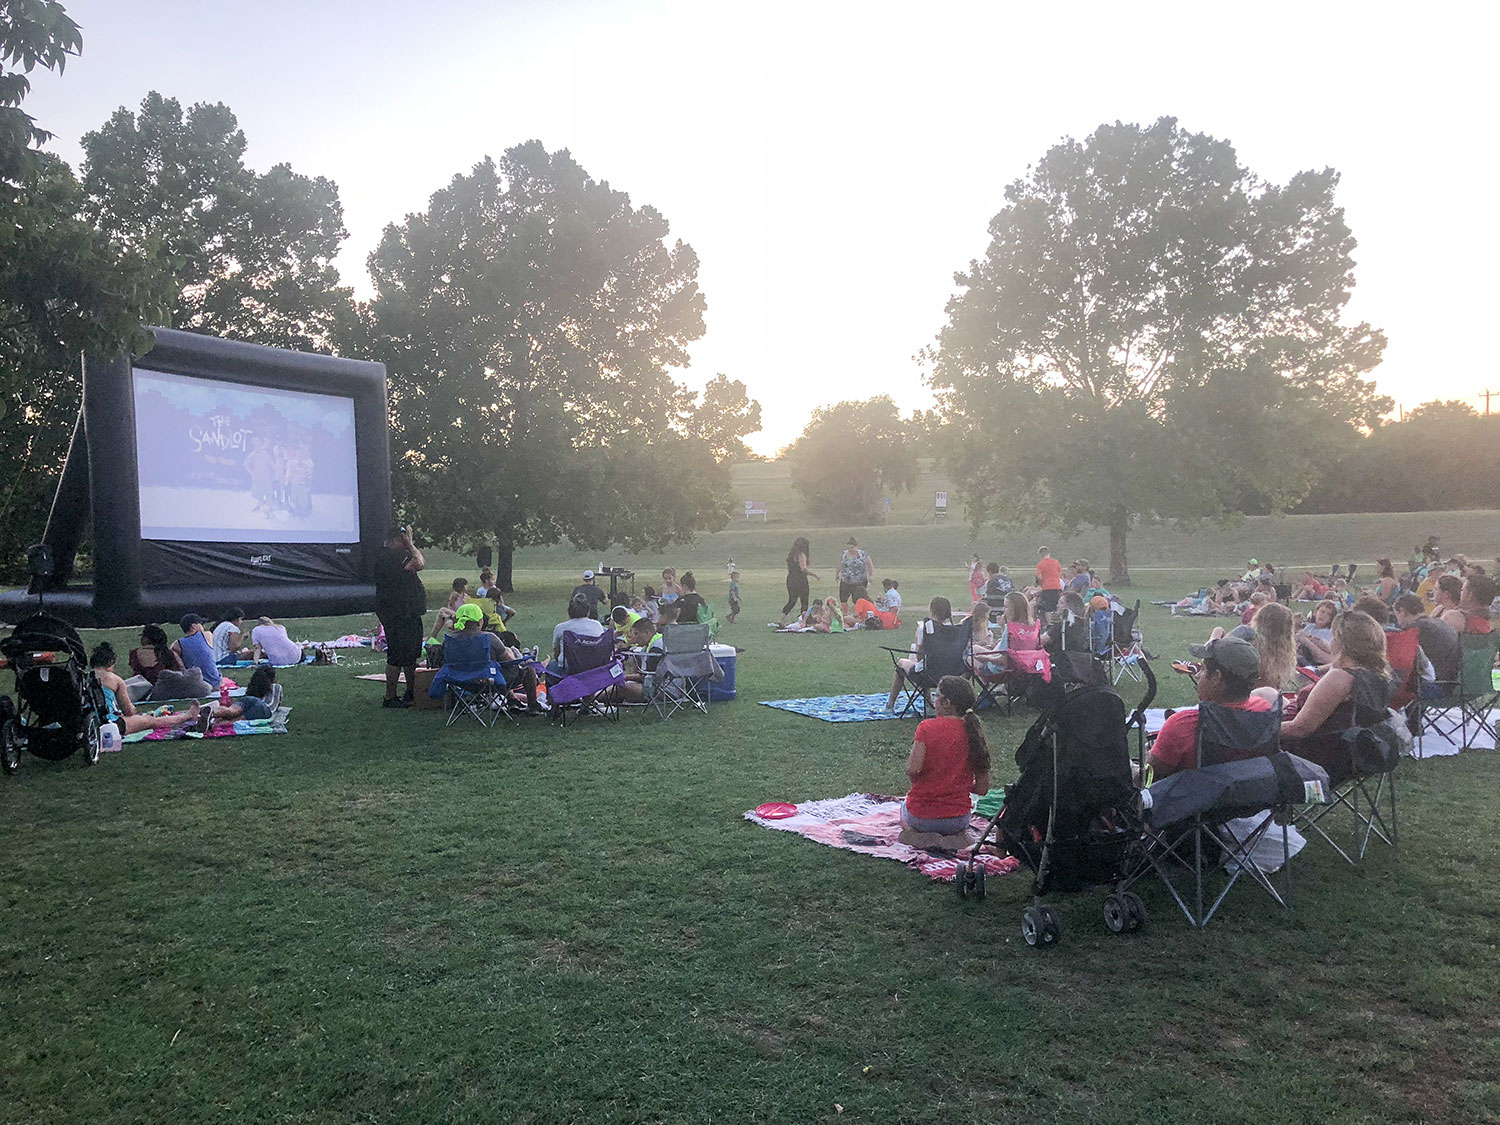 People watching a movie during the Sunset Movie Series in Georgetown, TX